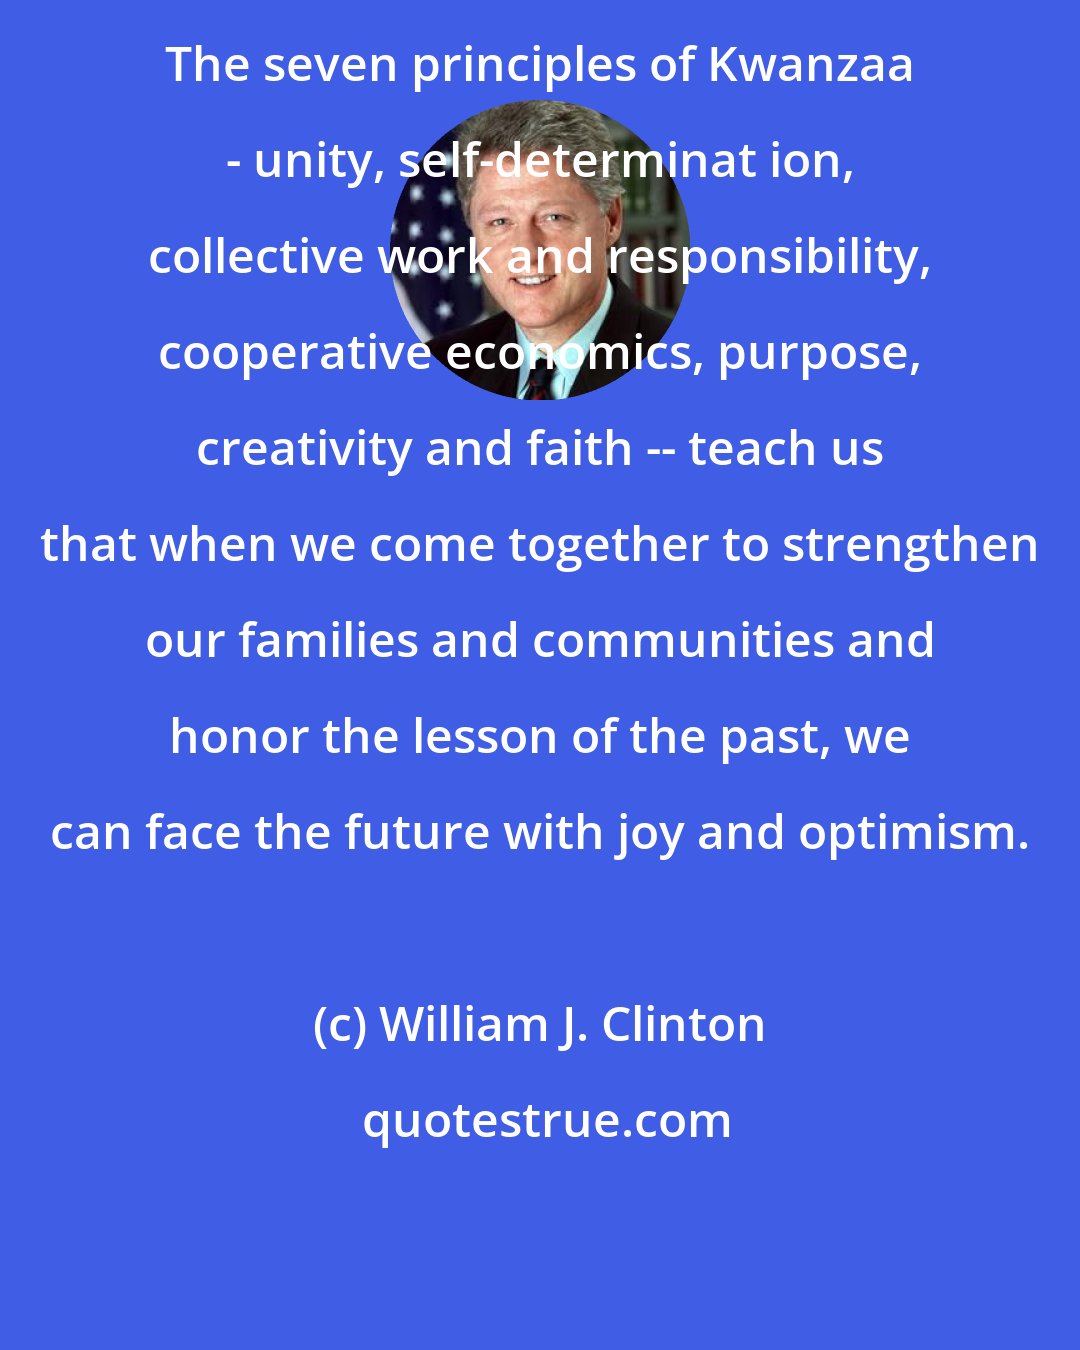 William J. Clinton: The seven principles of Kwanzaa - unity, self-determinat ion, collective work and responsibility, cooperative economics, purpose, creativity and faith -- teach us that when we come together to strengthen our families and communities and honor the lesson of the past, we can face the future with joy and optimism.